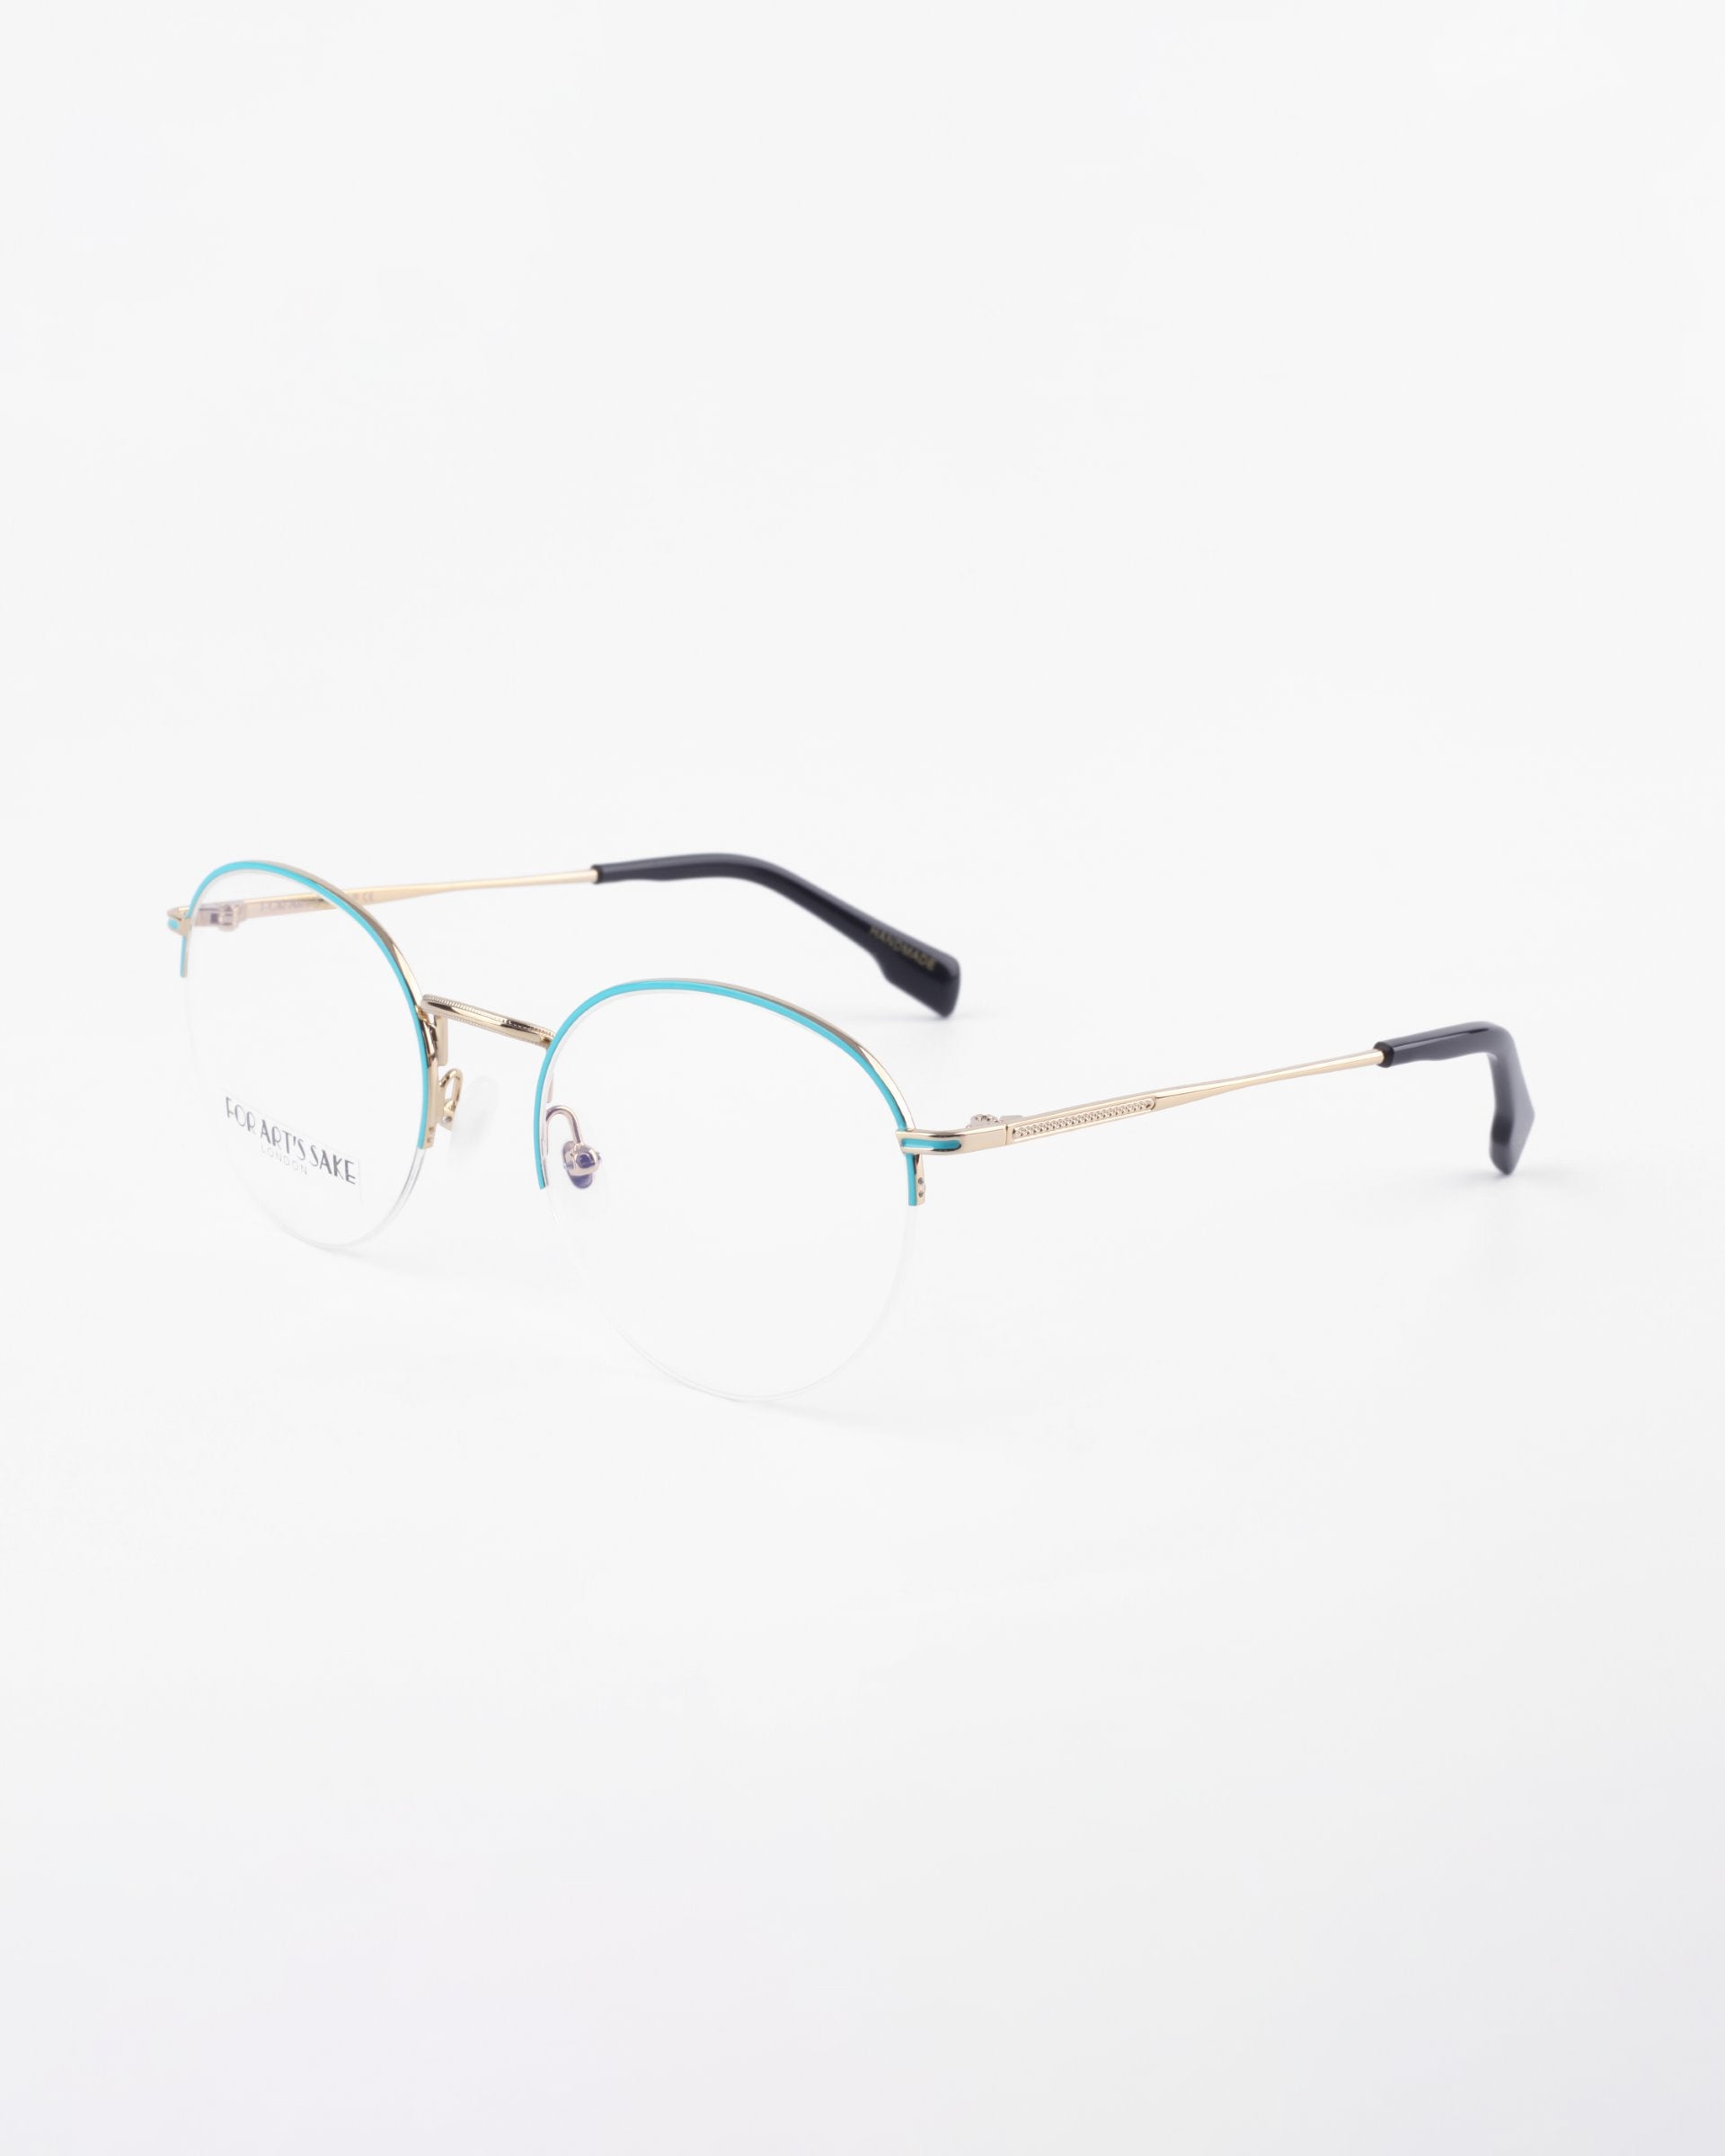 A pair of thin, gold-framed eyeglasses with rimless, prescription lenses. The temples have black plastic tips, and there is a subtle touch of blue on the upper part of the lenses for a blue light filter. The For Art's Sake® Ivy glasses are displayed on a white background.